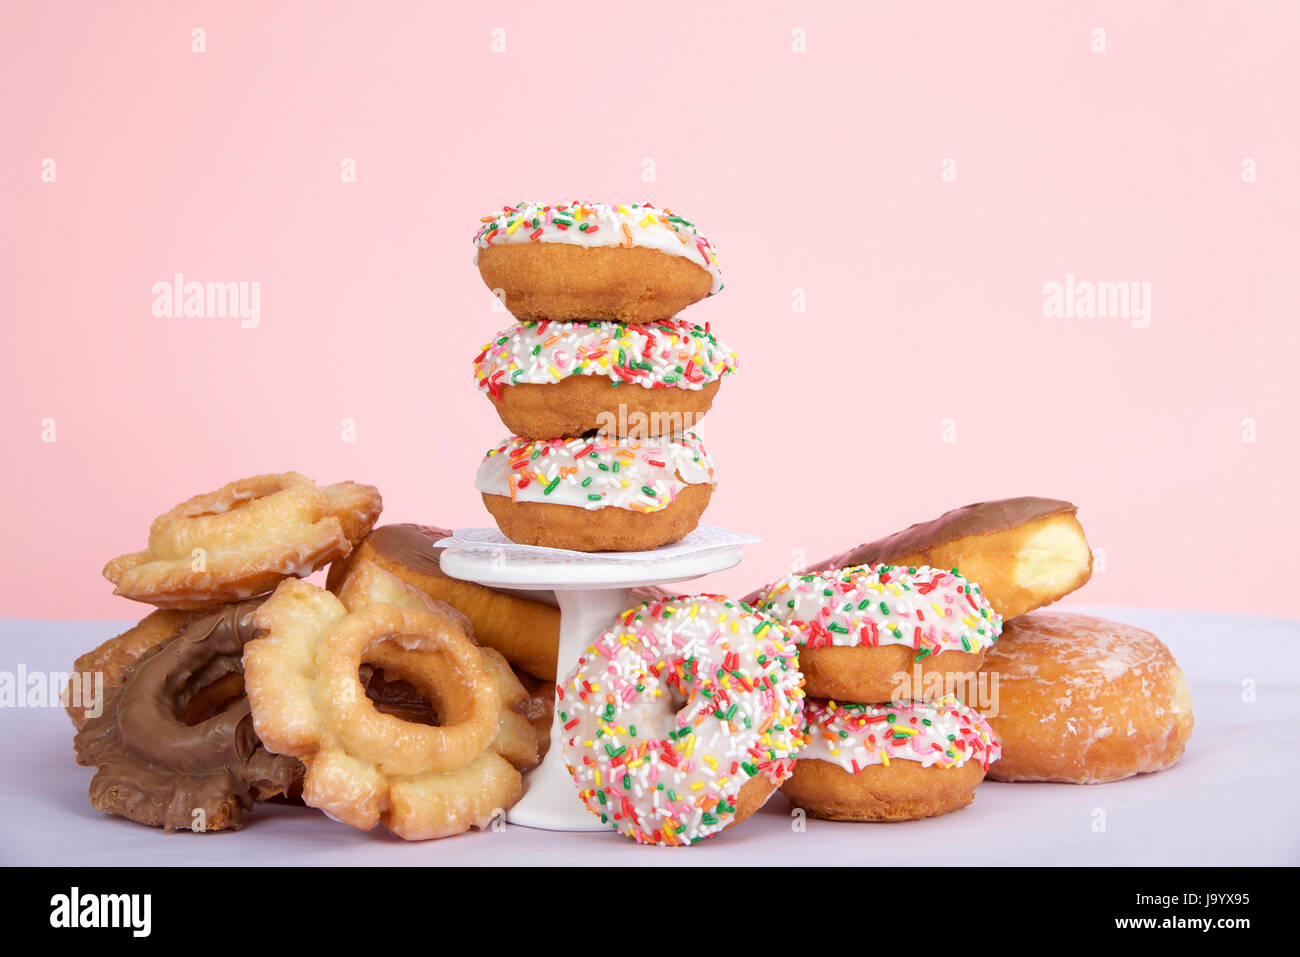 Cake donuts with white frosting and colorful sprinkles stacked on and around a small pedestal surrounded by birthday presents. Number 1 candle burning Stock Photo